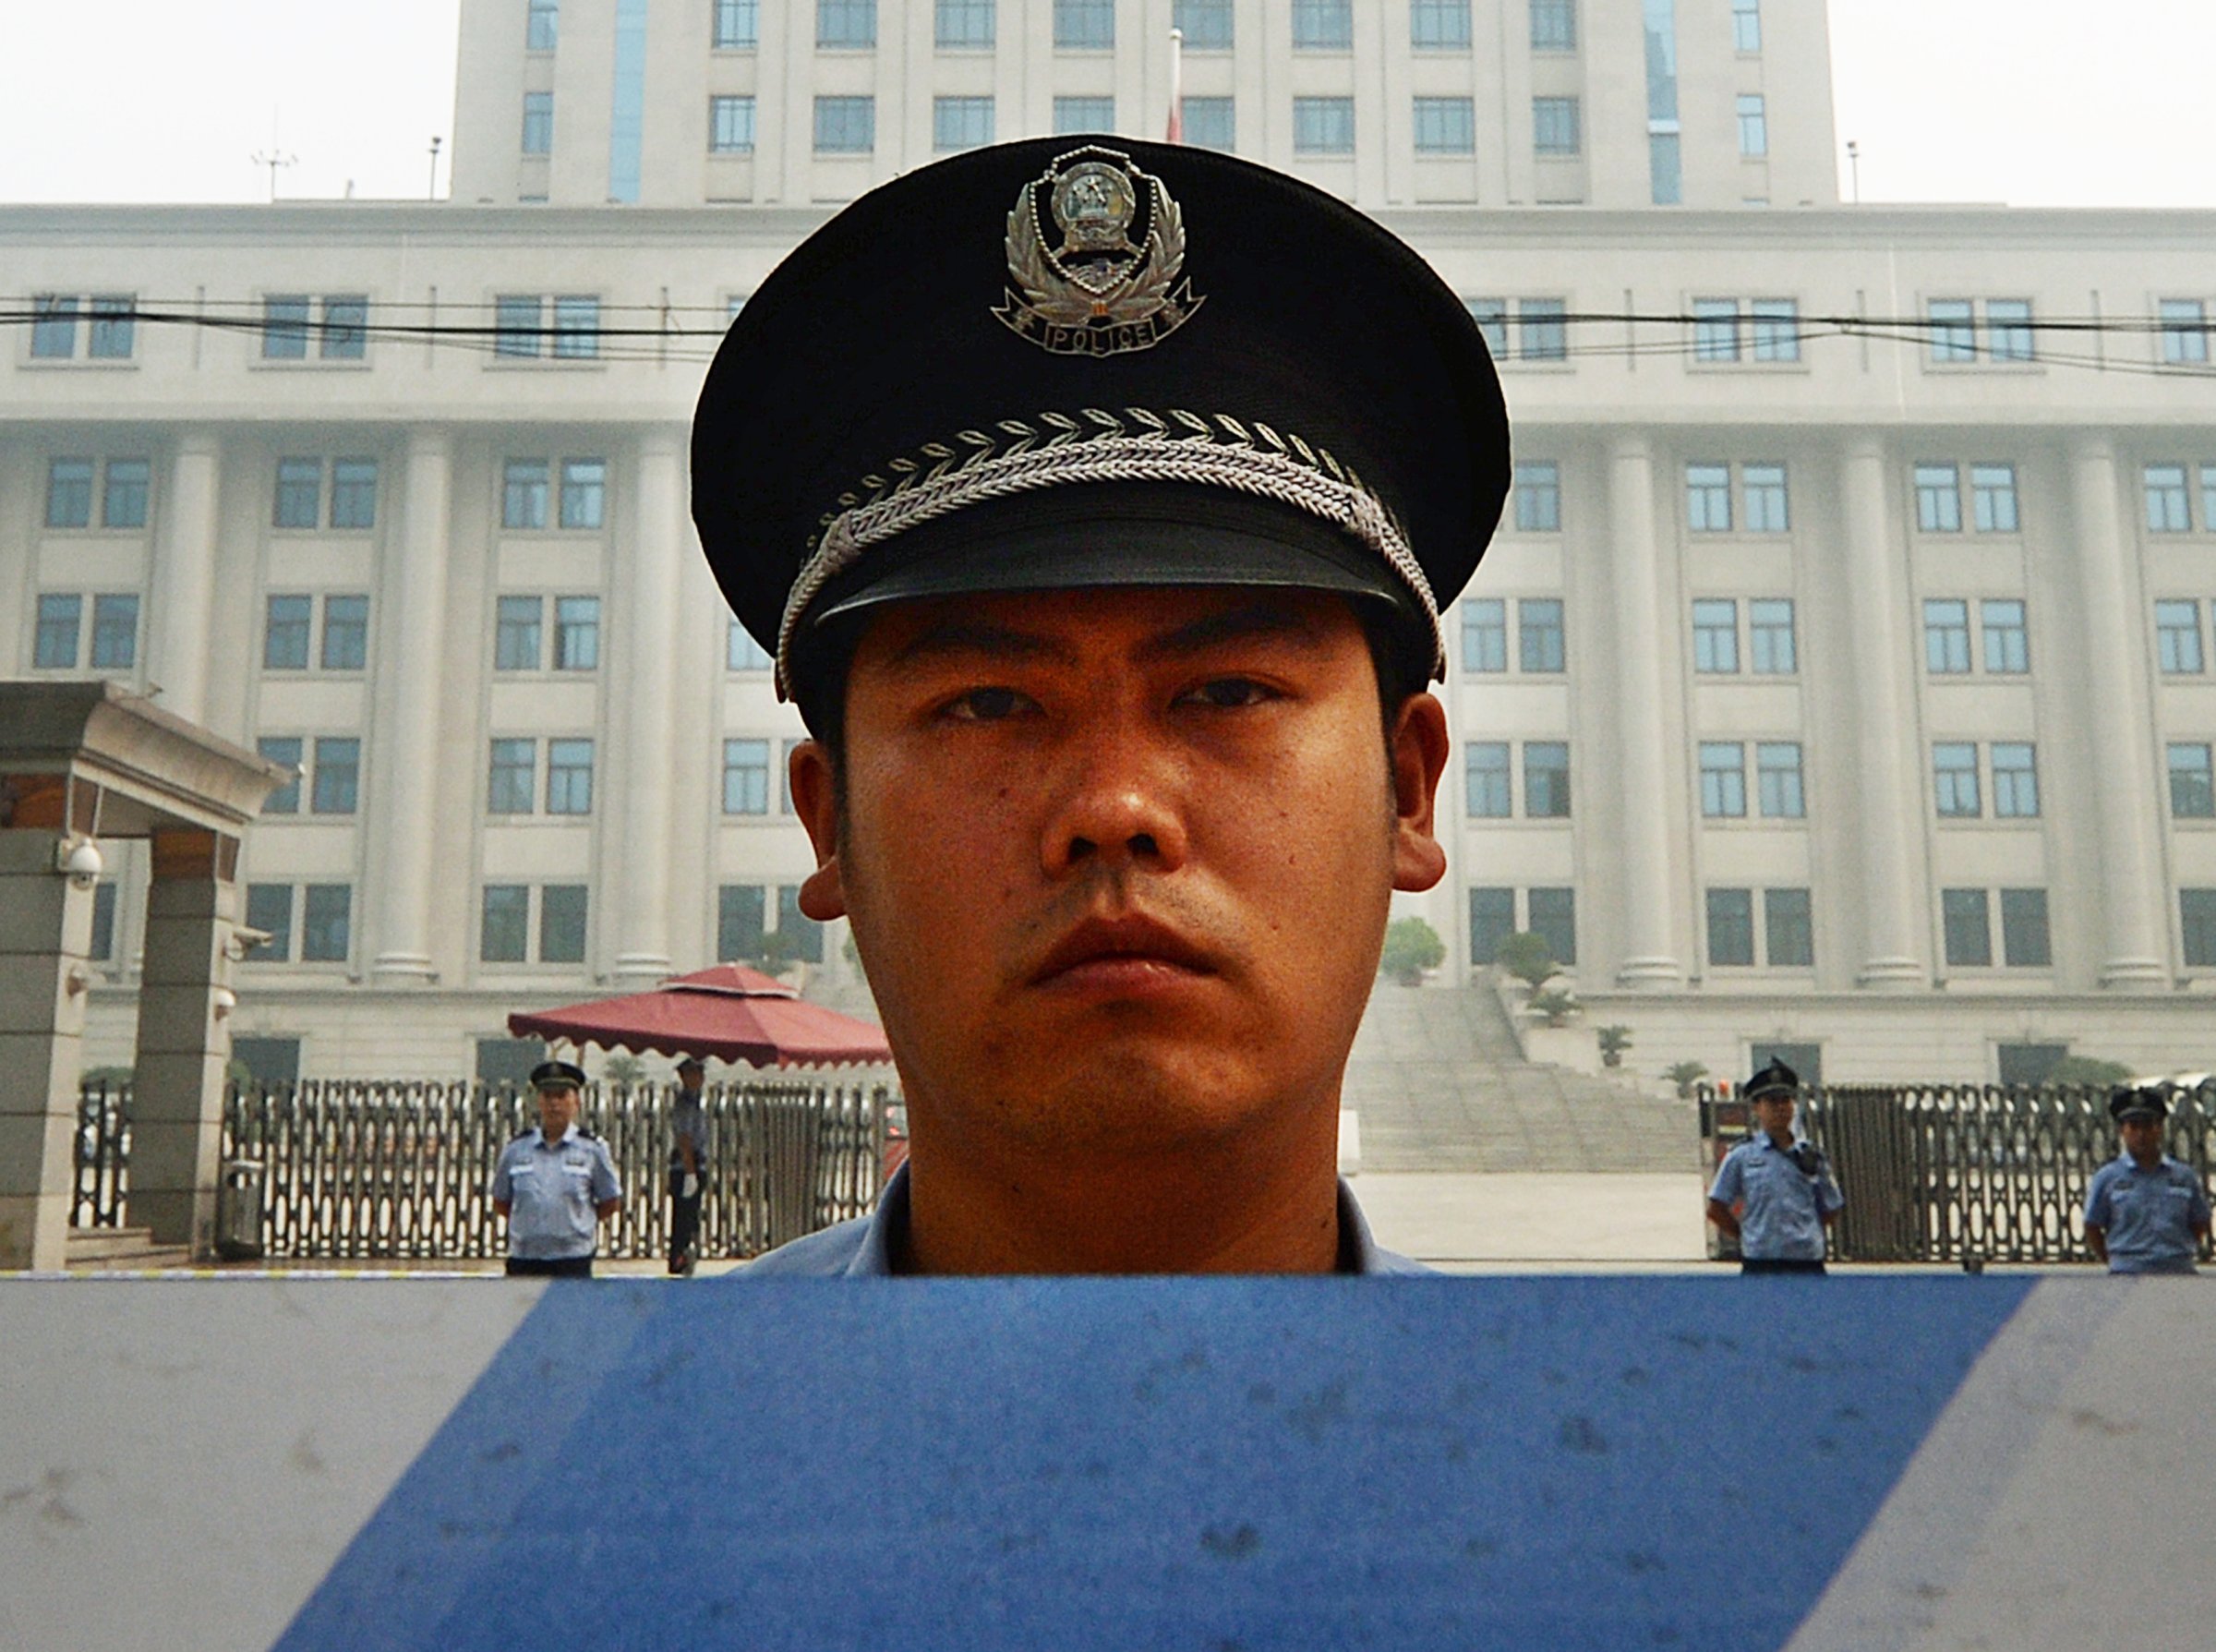 Police stand guard during the third day of the trial of disgraced official Bo Xilai at the Intermediate People's Court in Jinan, Shandong province, on Aug. 24, 2013.